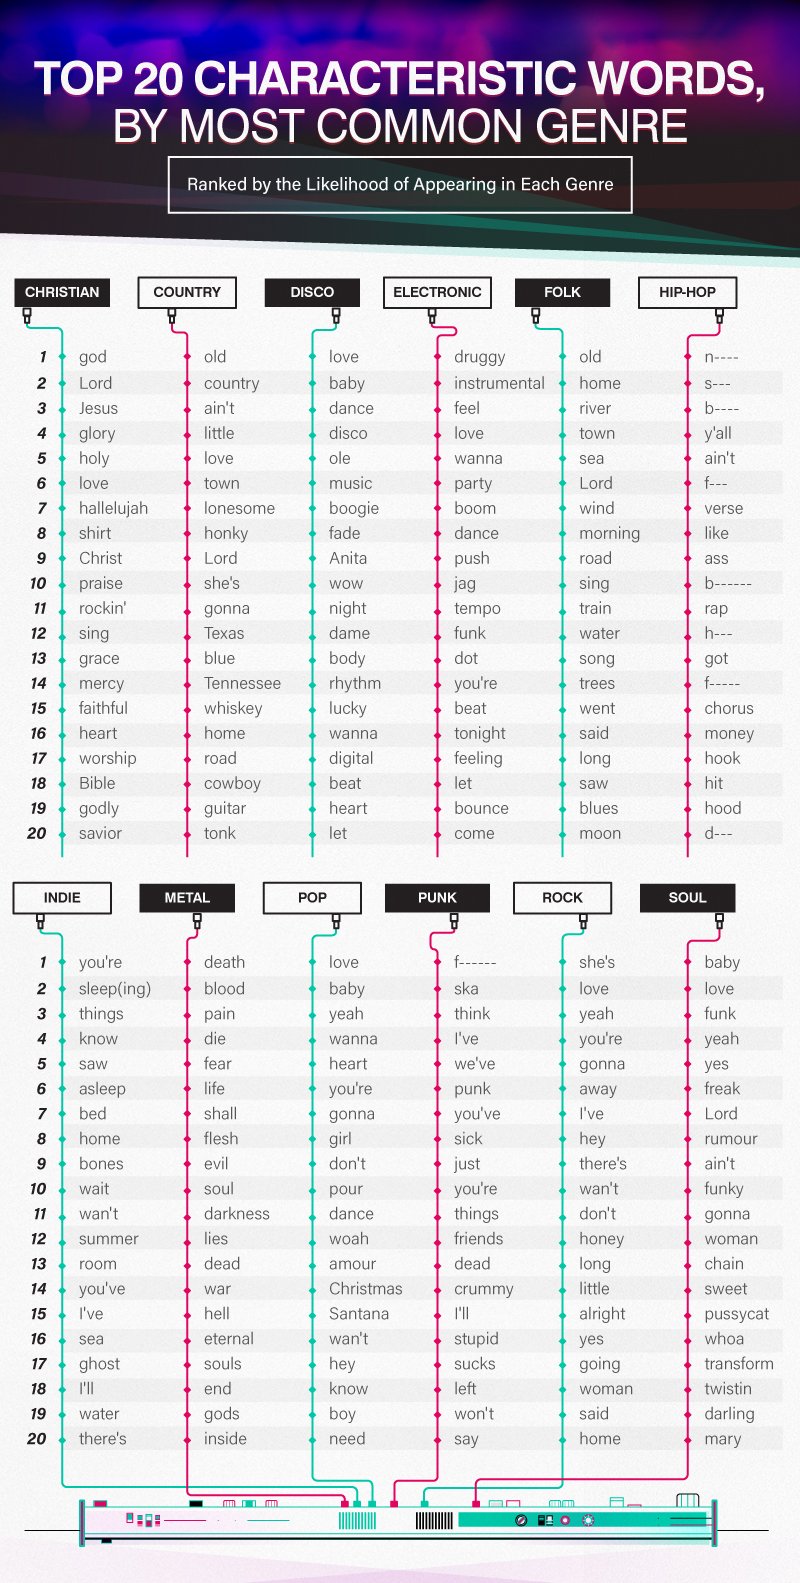 Characteristic Words for the Most Popular Music Genres - Infographic